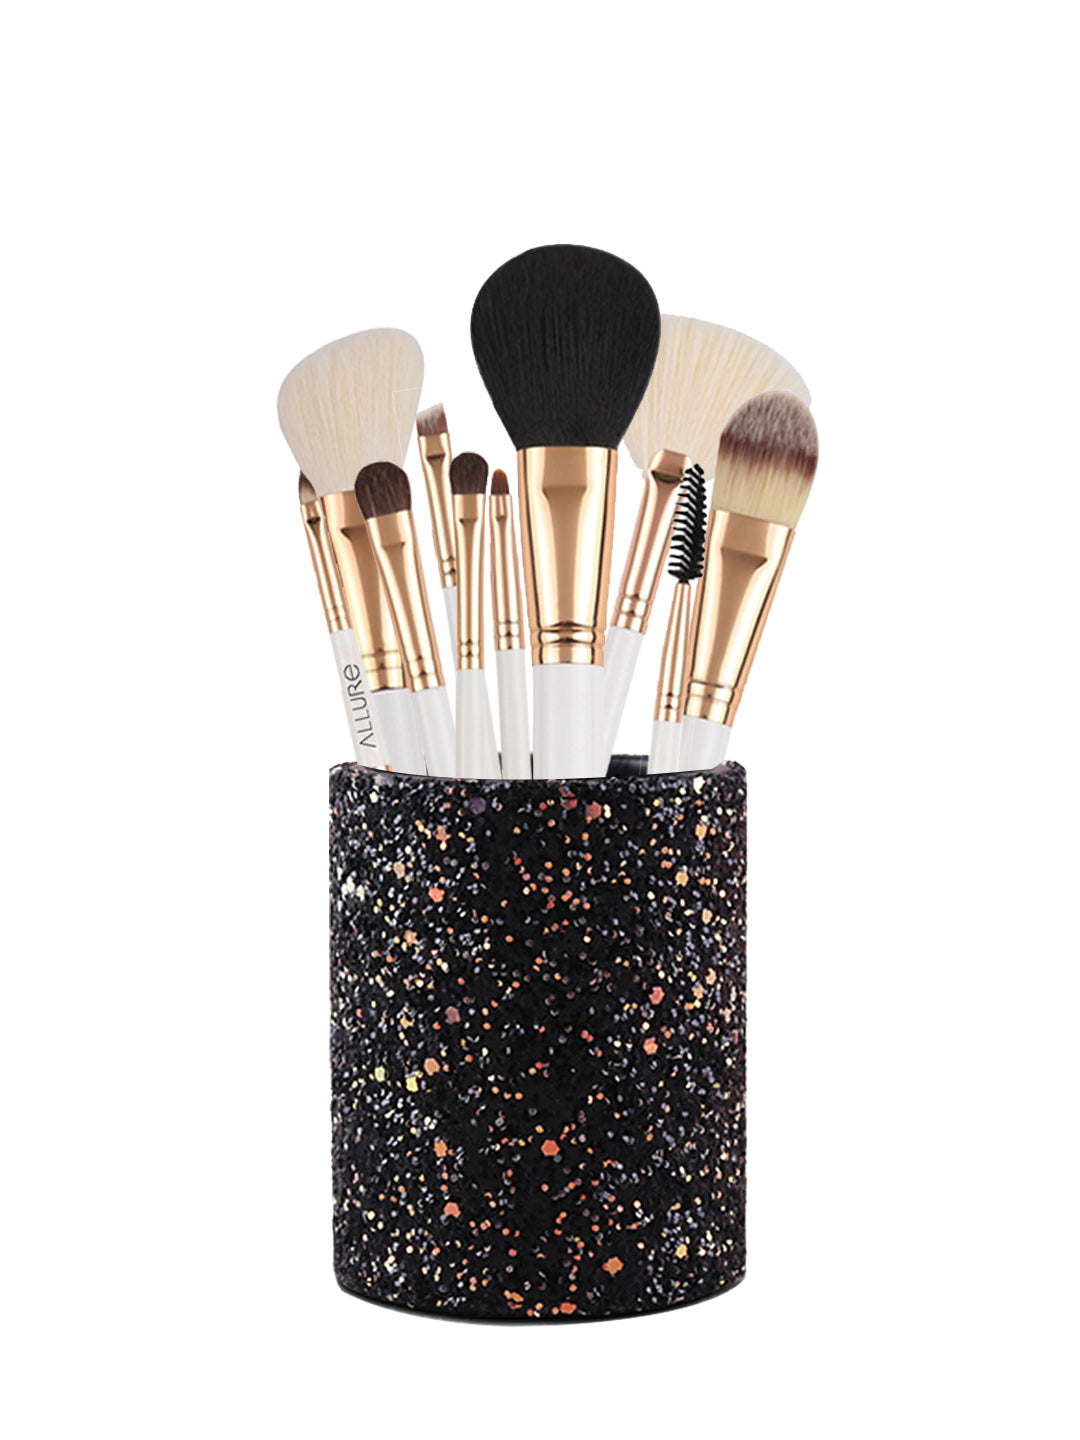 Gift Set Contains 10 Pc Makeup Brush Set & Other Essential Makeup Tools-4